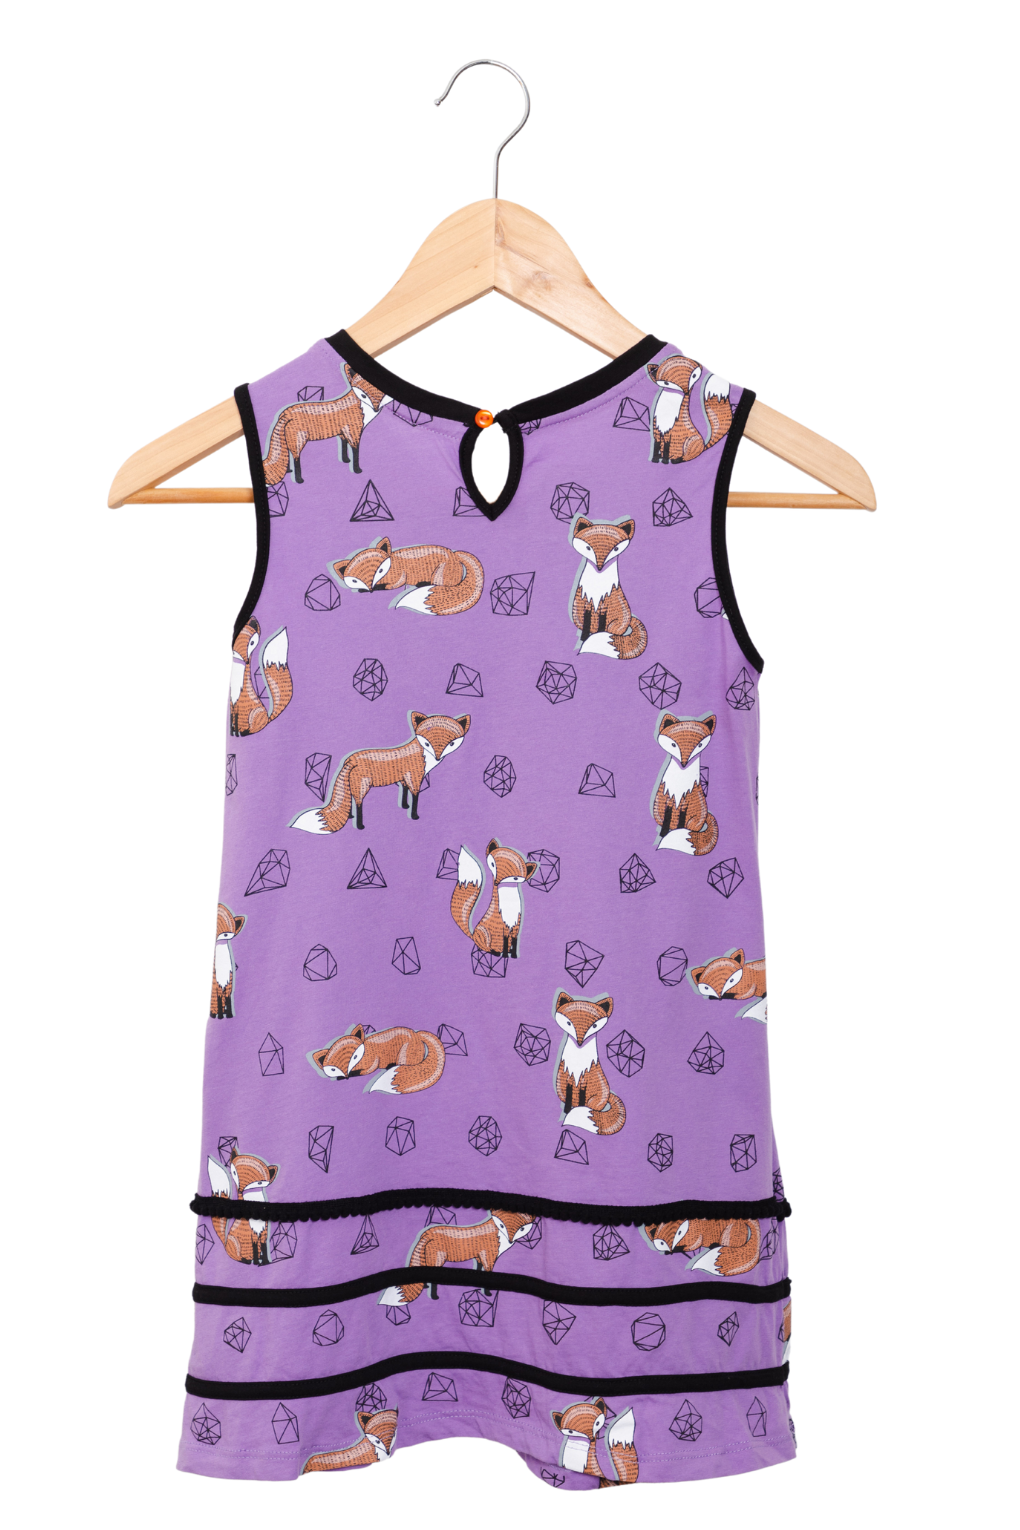 Purple fox girl dress, non-stereotypical style with pockets, durable clothing, girl dress - Prisma Kiddos